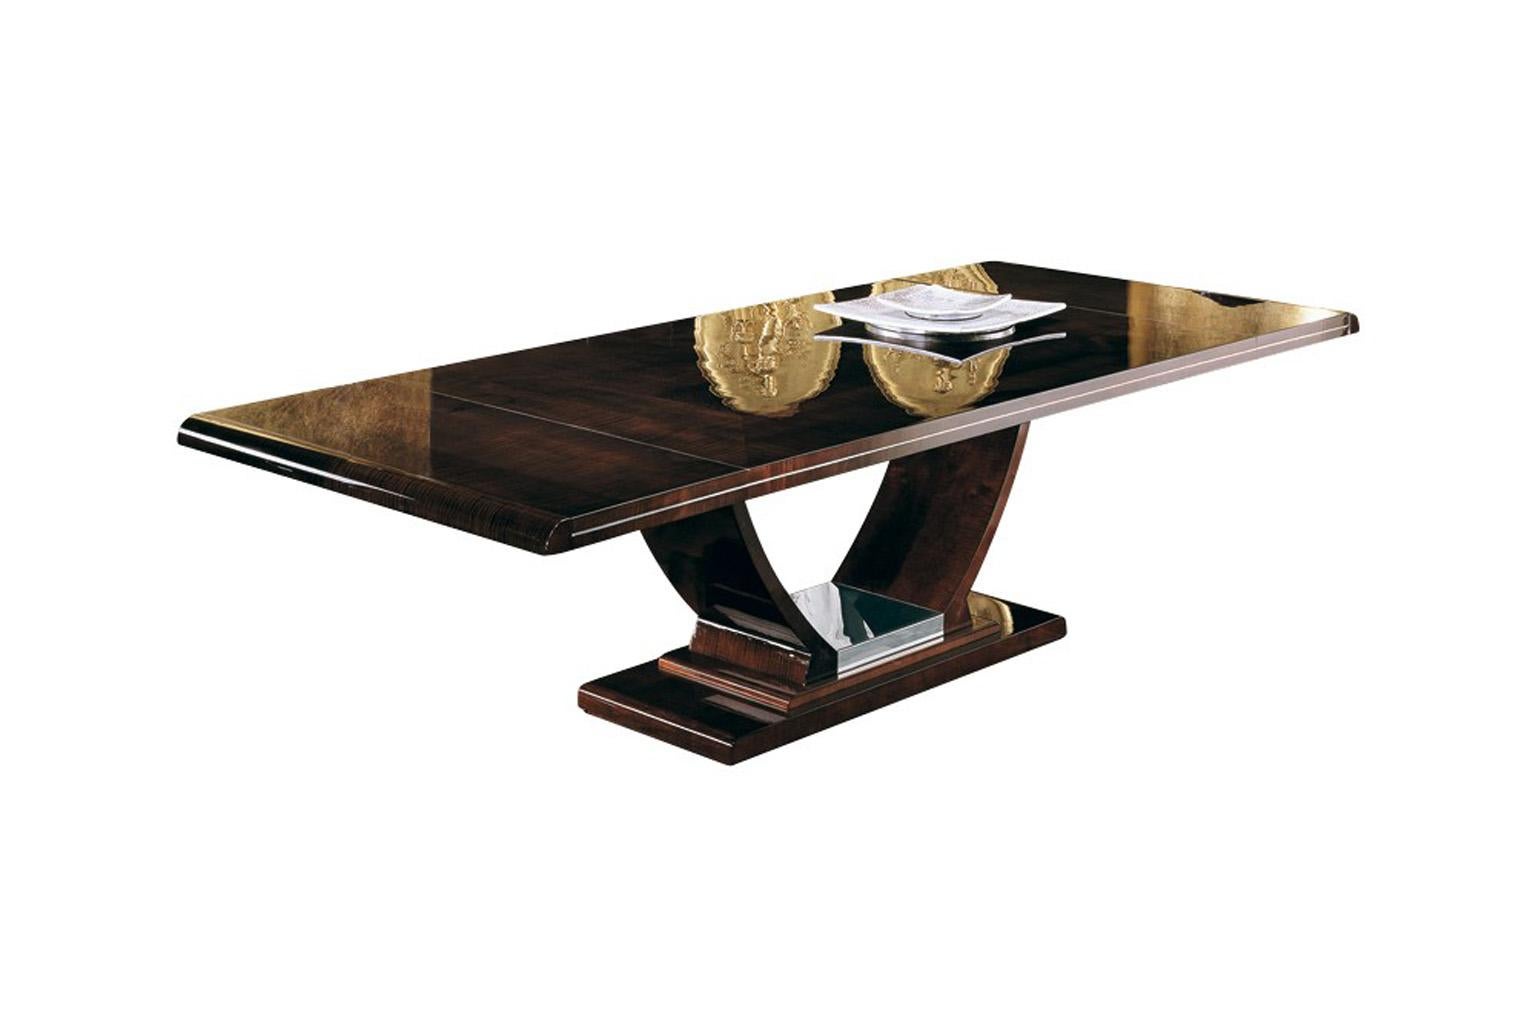 Rectangular table with two extension of cm 48 (19”) with top in ash-burl inlay and curly sycamore veneer in high gloss polyester, finish in dark moka tone and polished stainless steel chrome base.
Measures: 77” L x 46” W x 30” H (closed)
113” L x